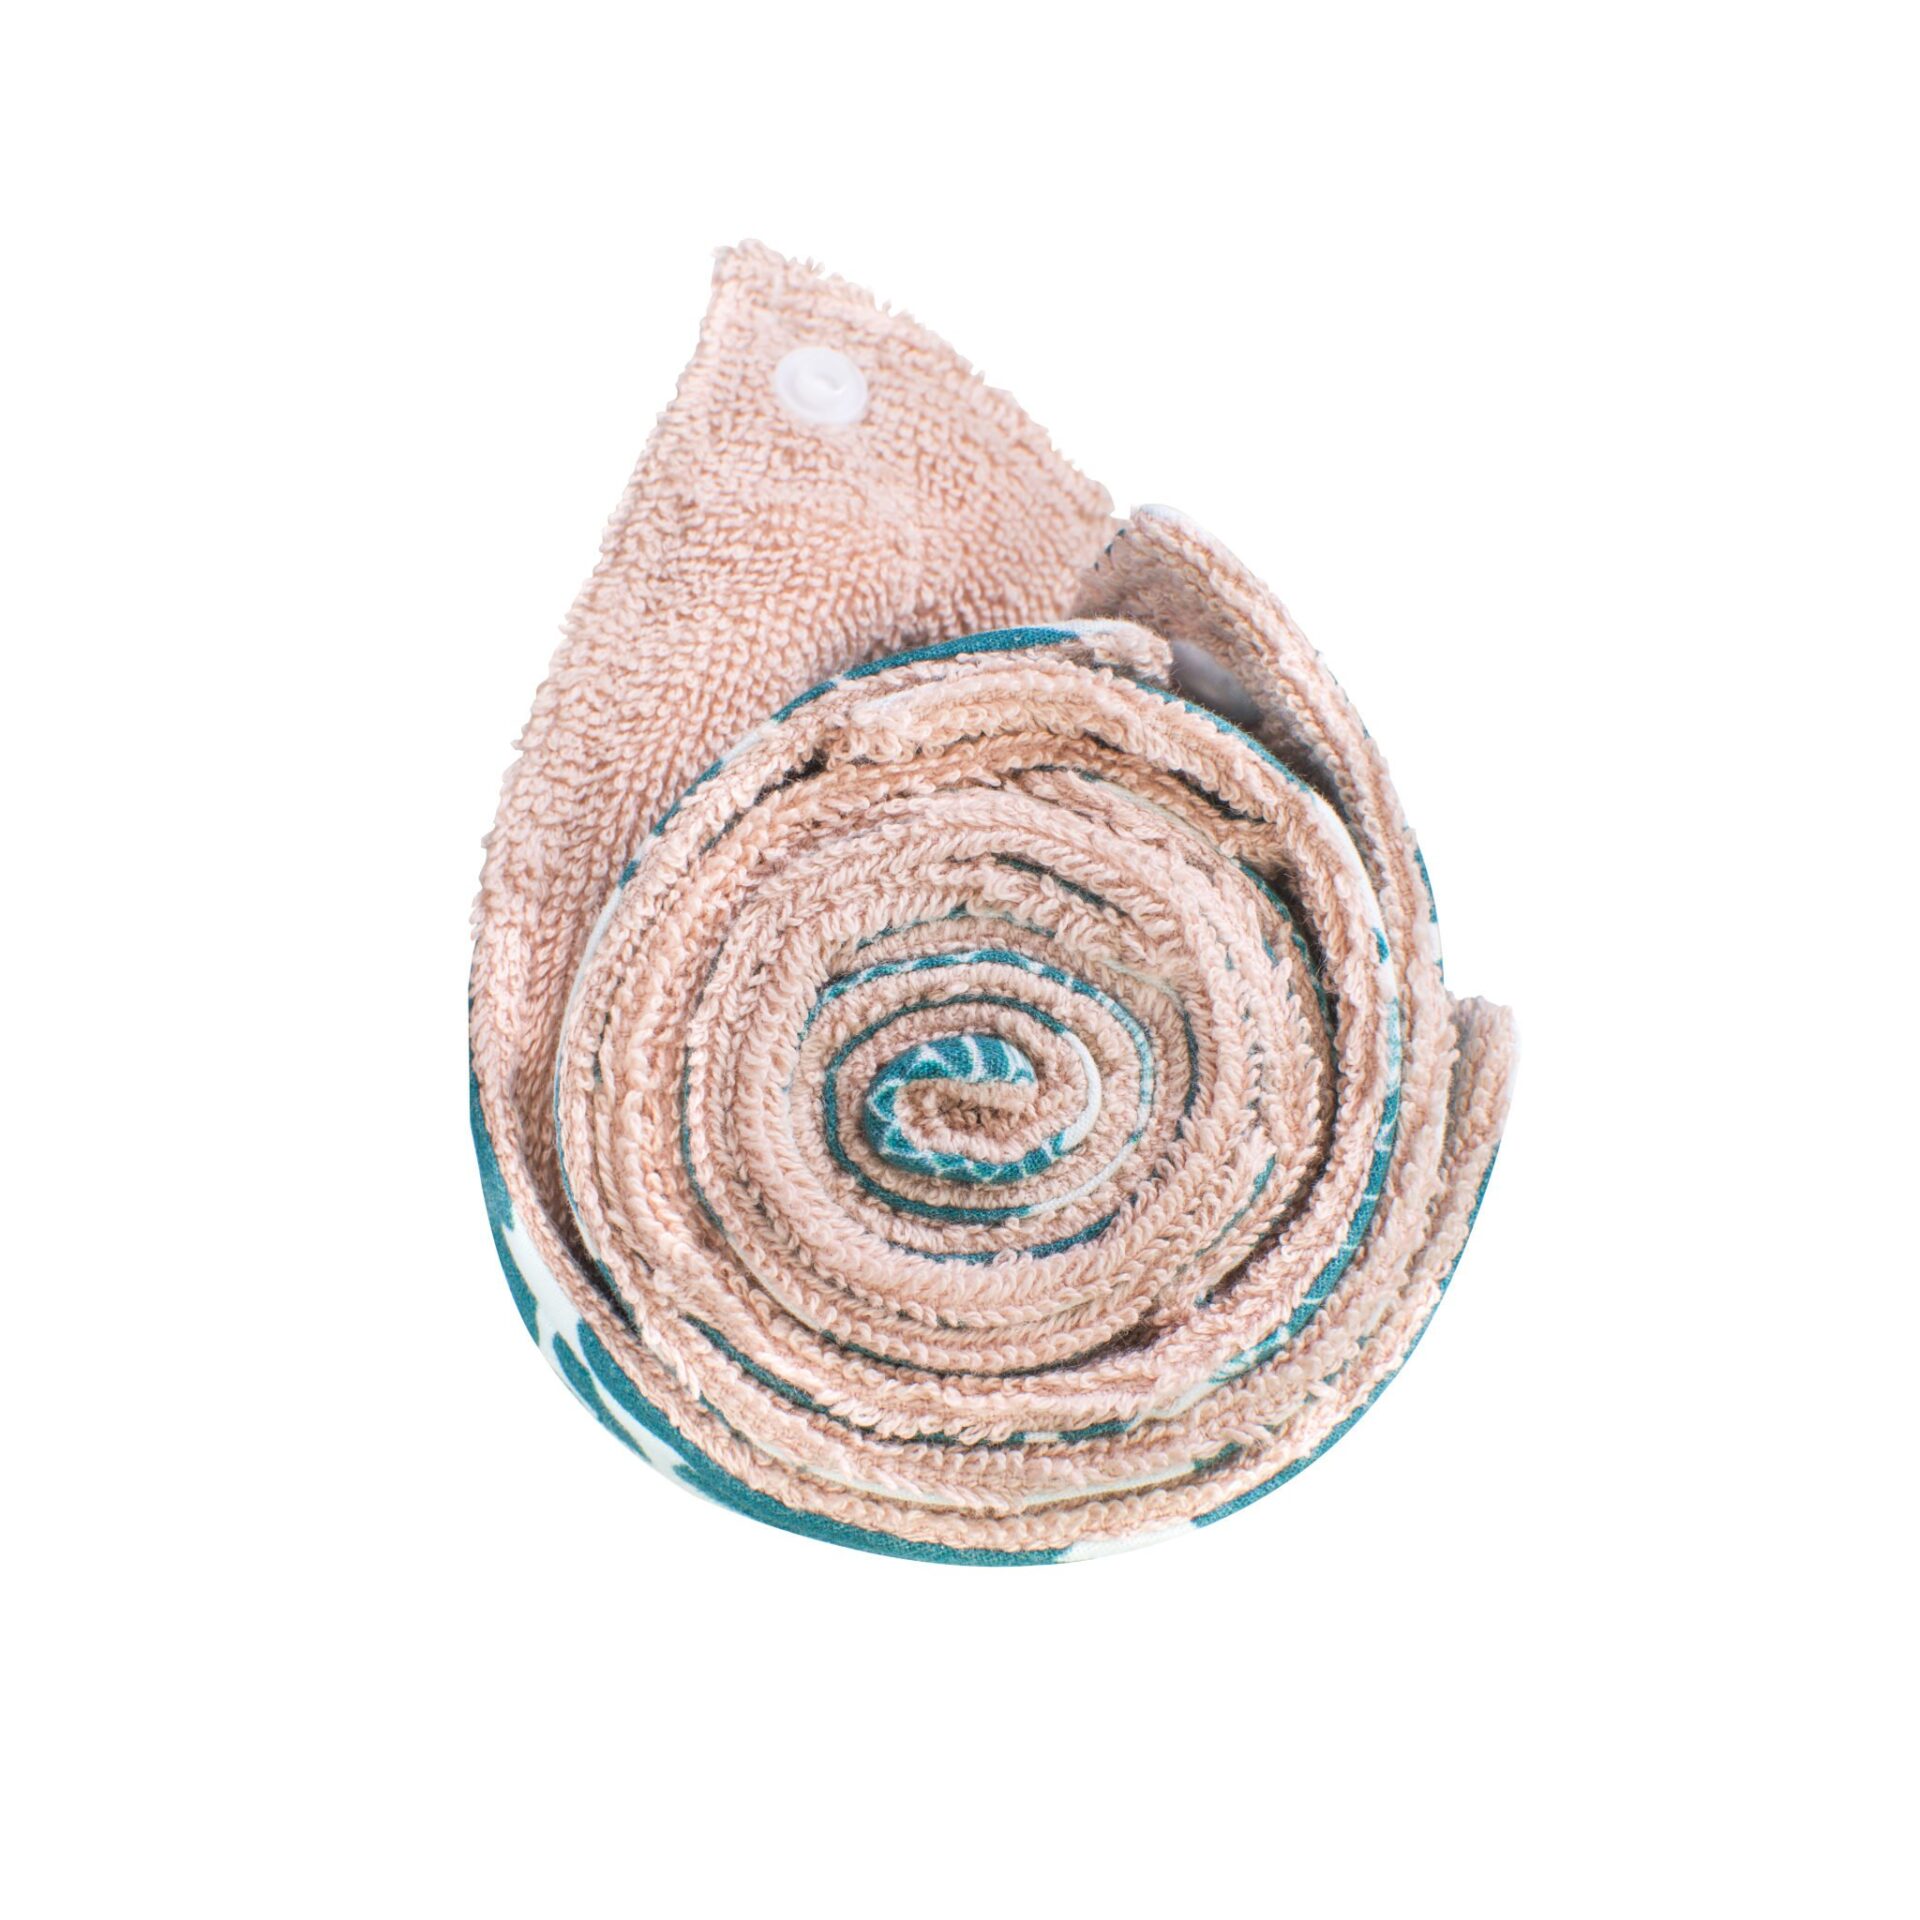 Double Use Non Woven Washable Reusable Kitchen Towel Roll Super Strong,  Durable, And Absorbent For Kitchen Papers RRA10261 From Are_beautiful,  $3.86